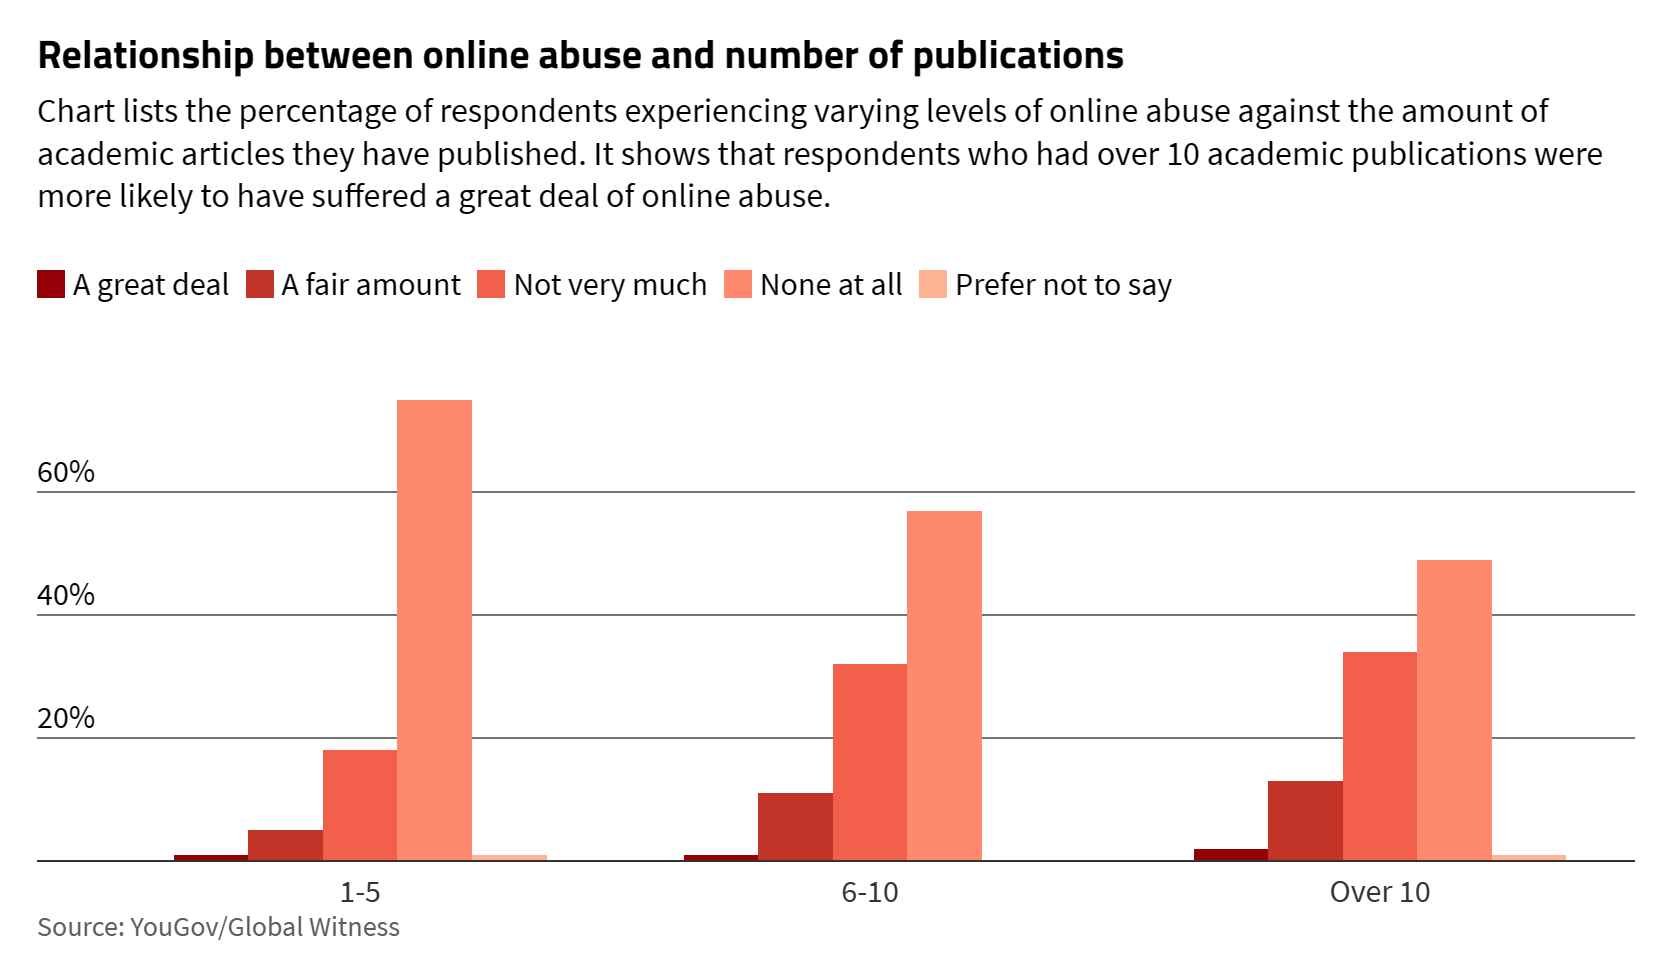 Relationship between online abuse of climate scientists and number of publications. Respondents who had over 10 academic publications were more likely to have suffered a great deal of online abuse. Graphic: Global Witness